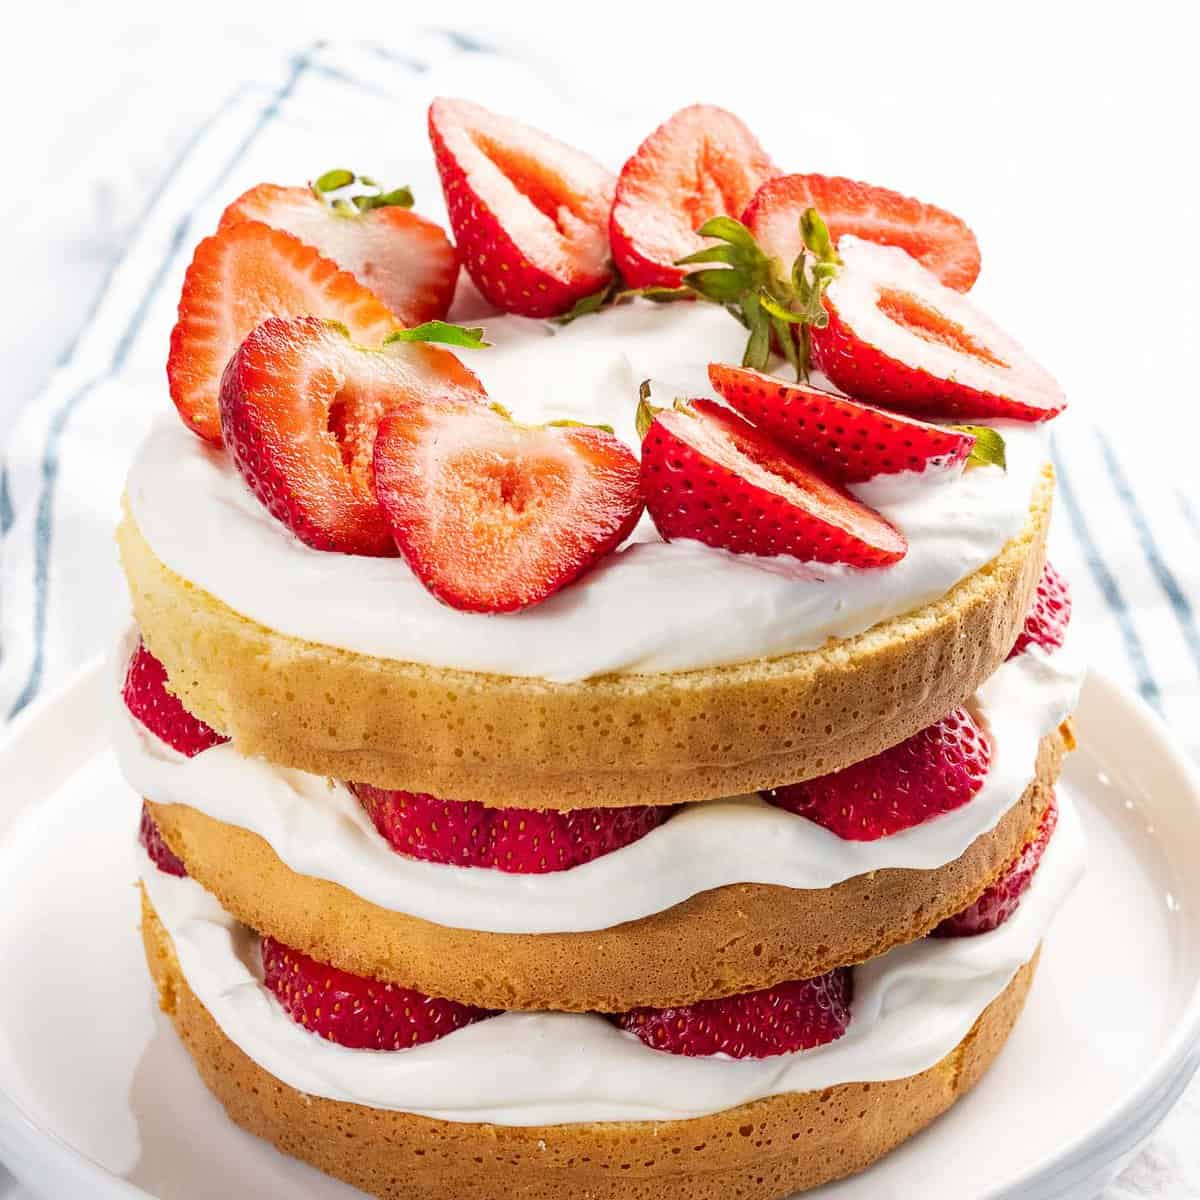 Strawberry cake with fresh strawberries and whipped cream.